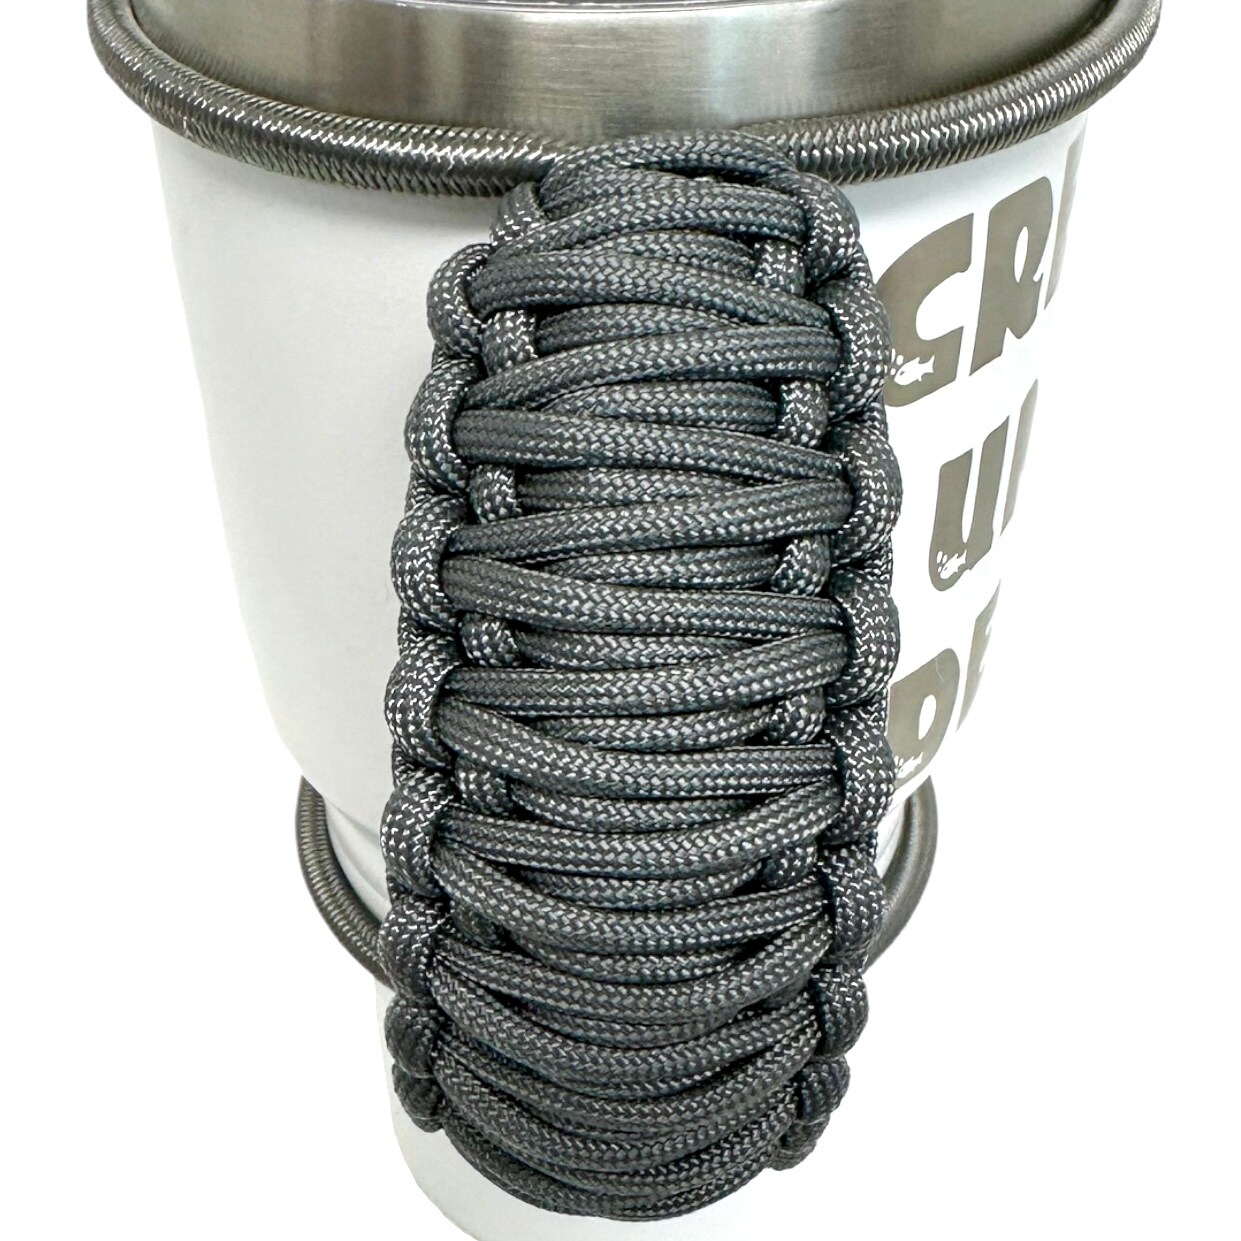 Paracord Handmade Handles for Stainless Steel Tumblers - Made in